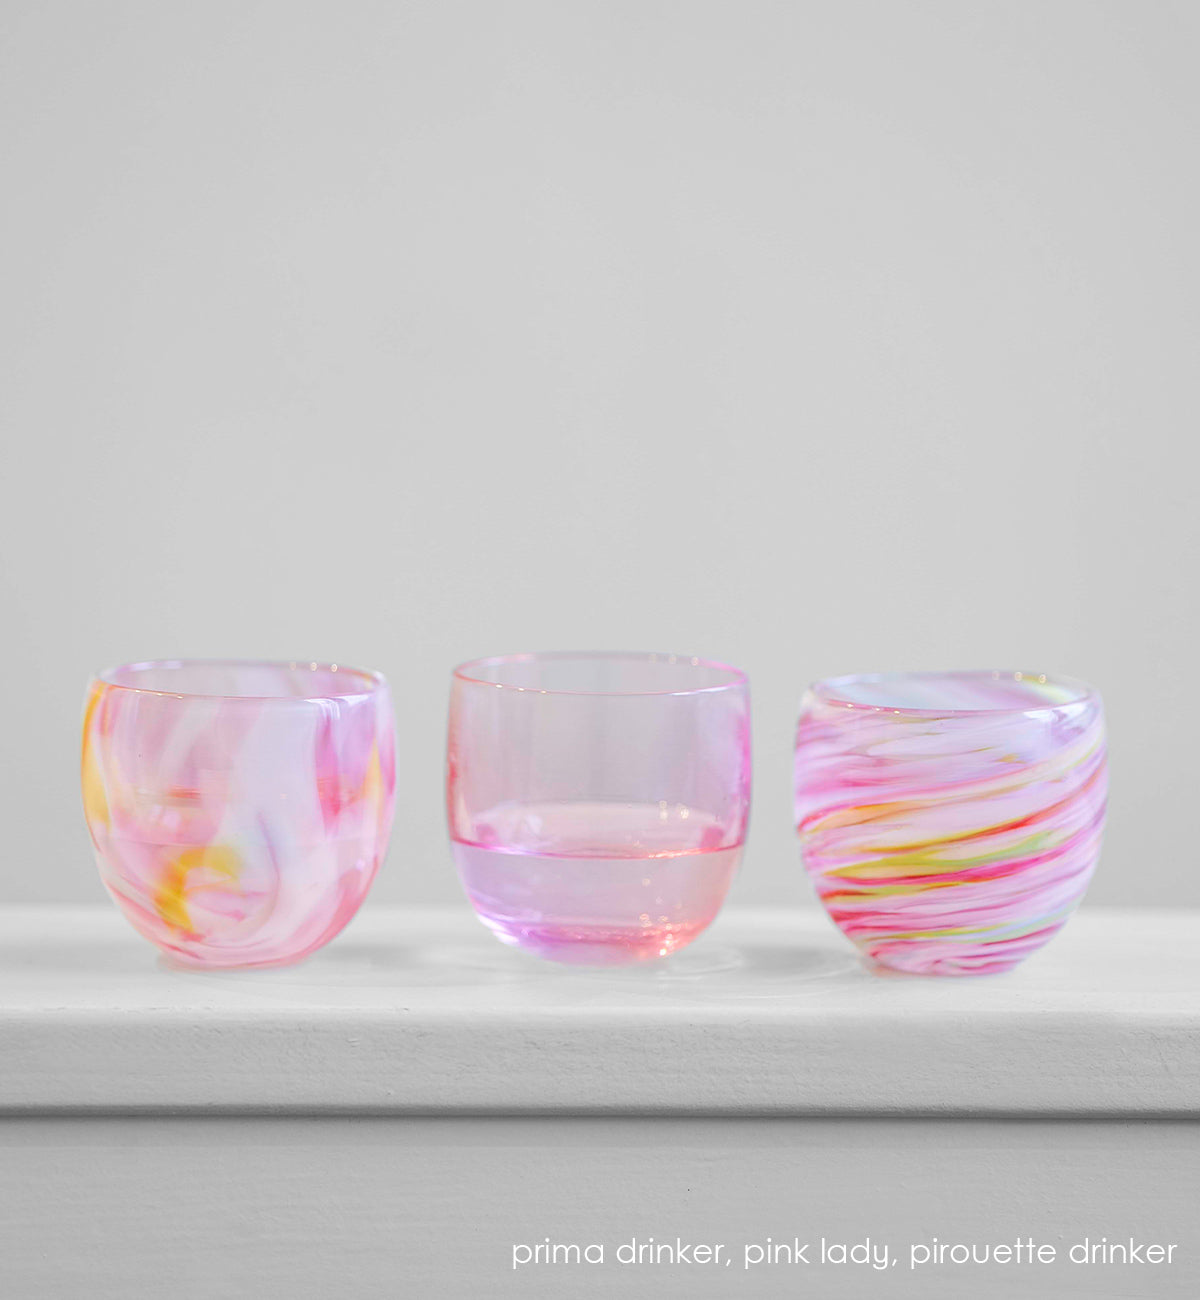 prima pink multi-colored petal, pink lady transparent pink, pirouette pink multi-colored swirl, hand-blown drinking glass.